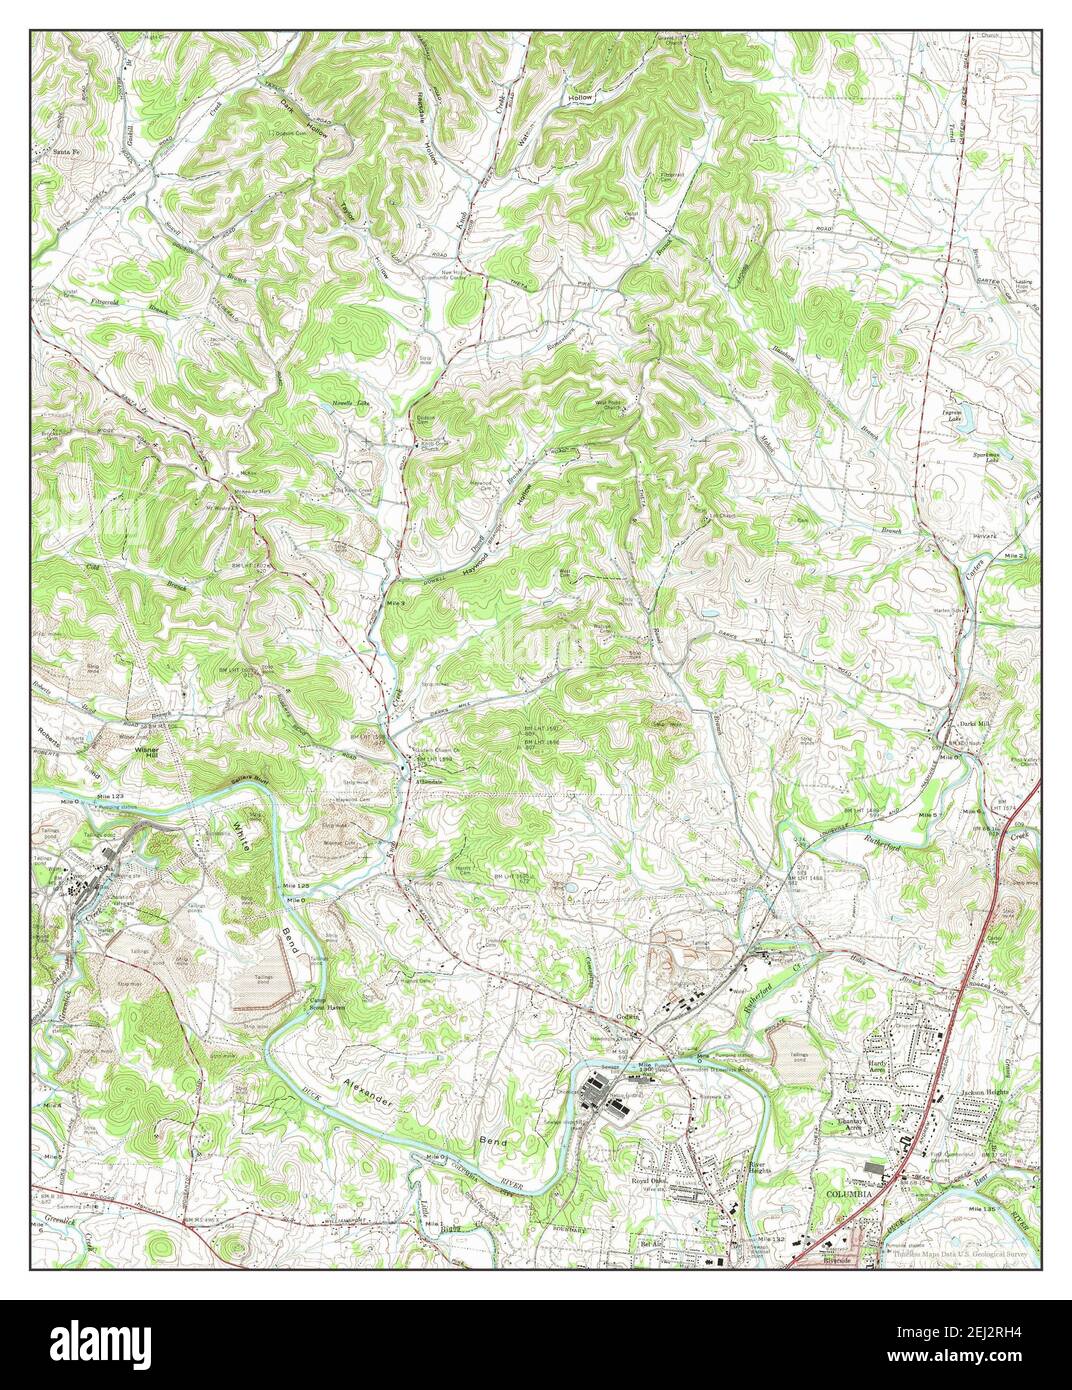 Godwin, Tennessee, map 1965, 1:24000, United States of America by Timeless Maps, data U.S. Geological Survey Stock Photo